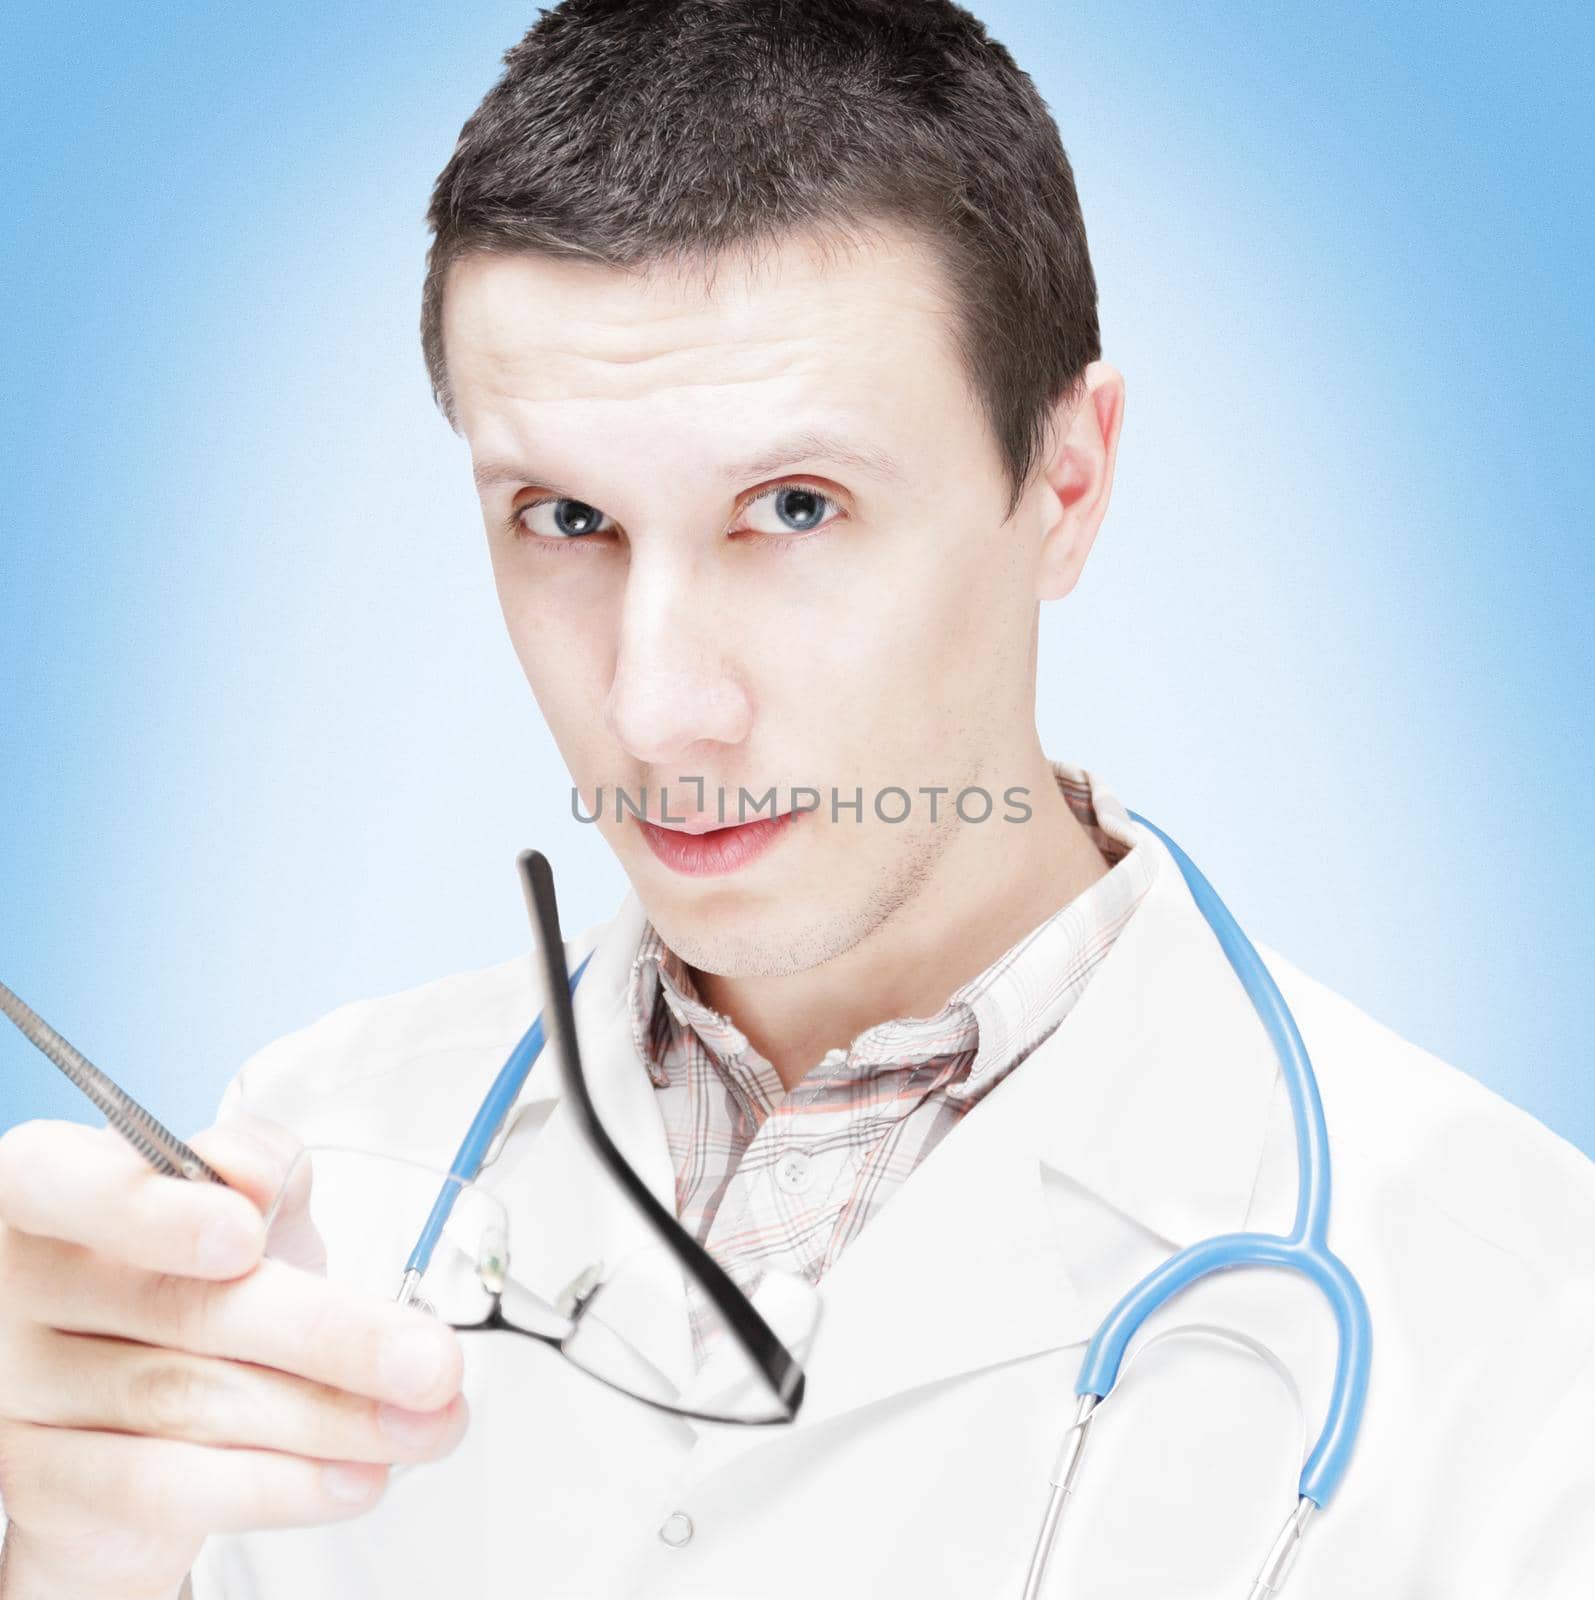 The serious doctor. It is isolated on a white background